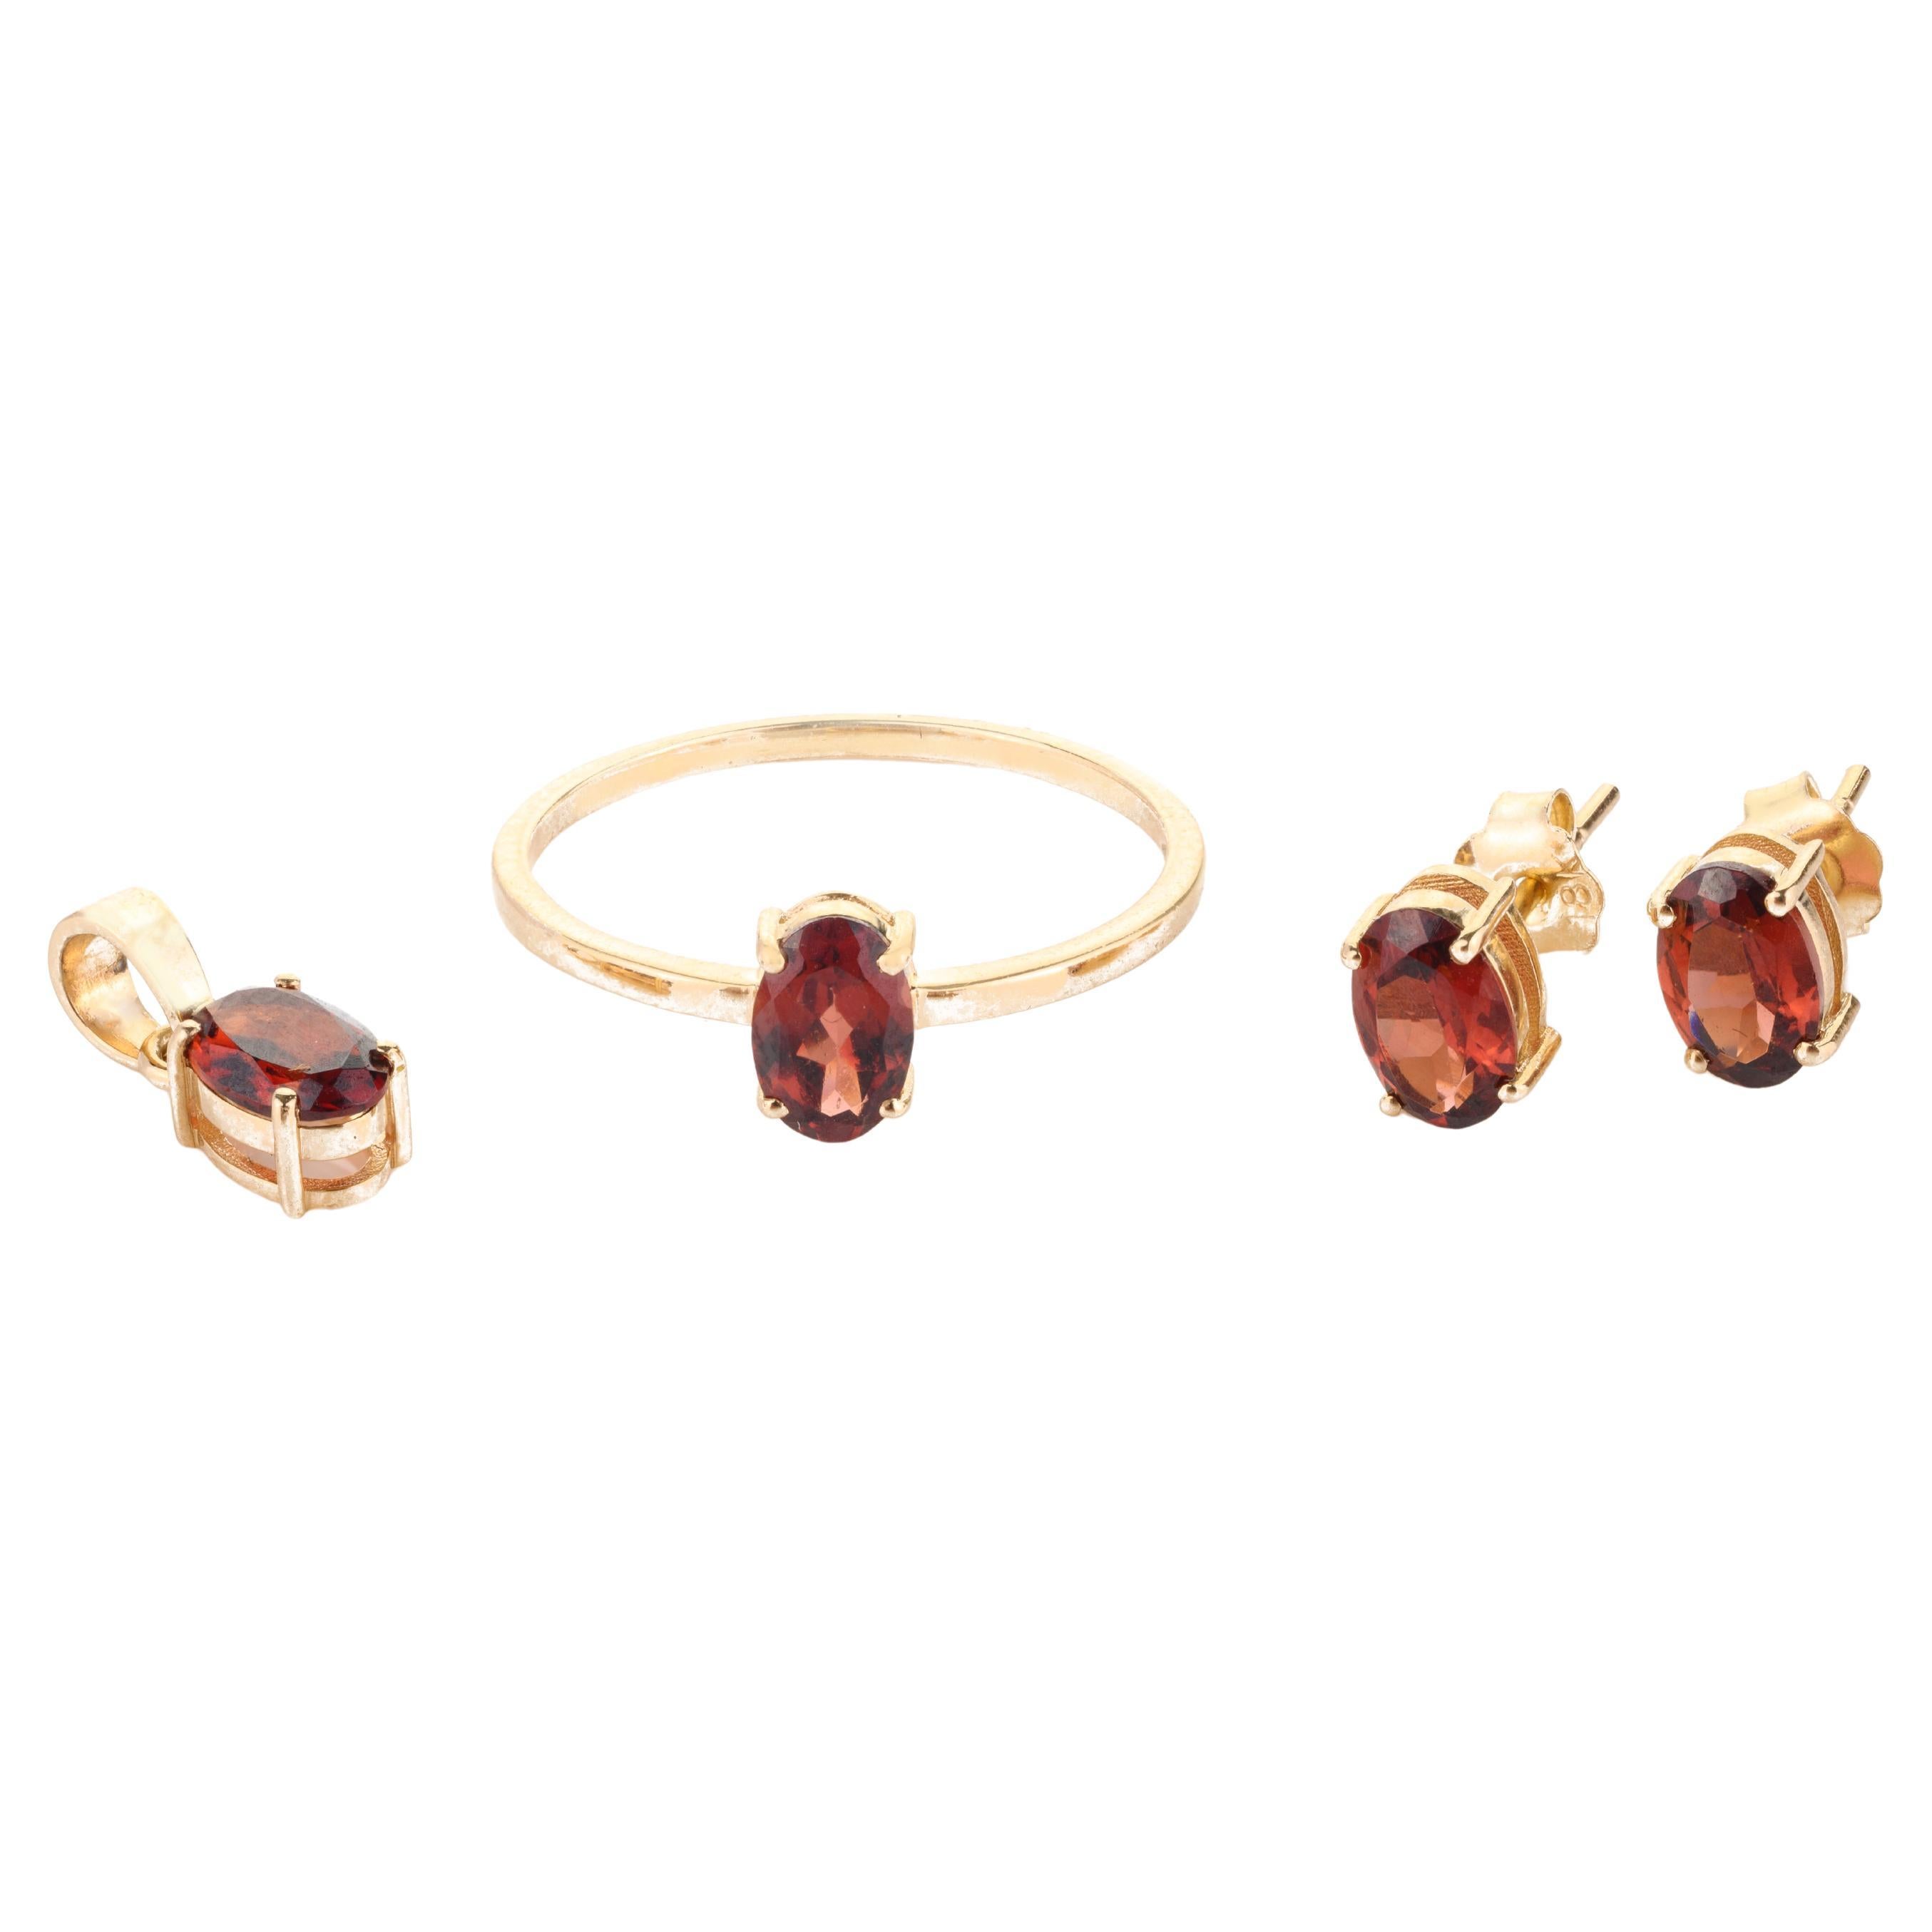 18k Solid Yellow Gold Handmade Garnet Ring, Earrings and Pendant Jewelry Set